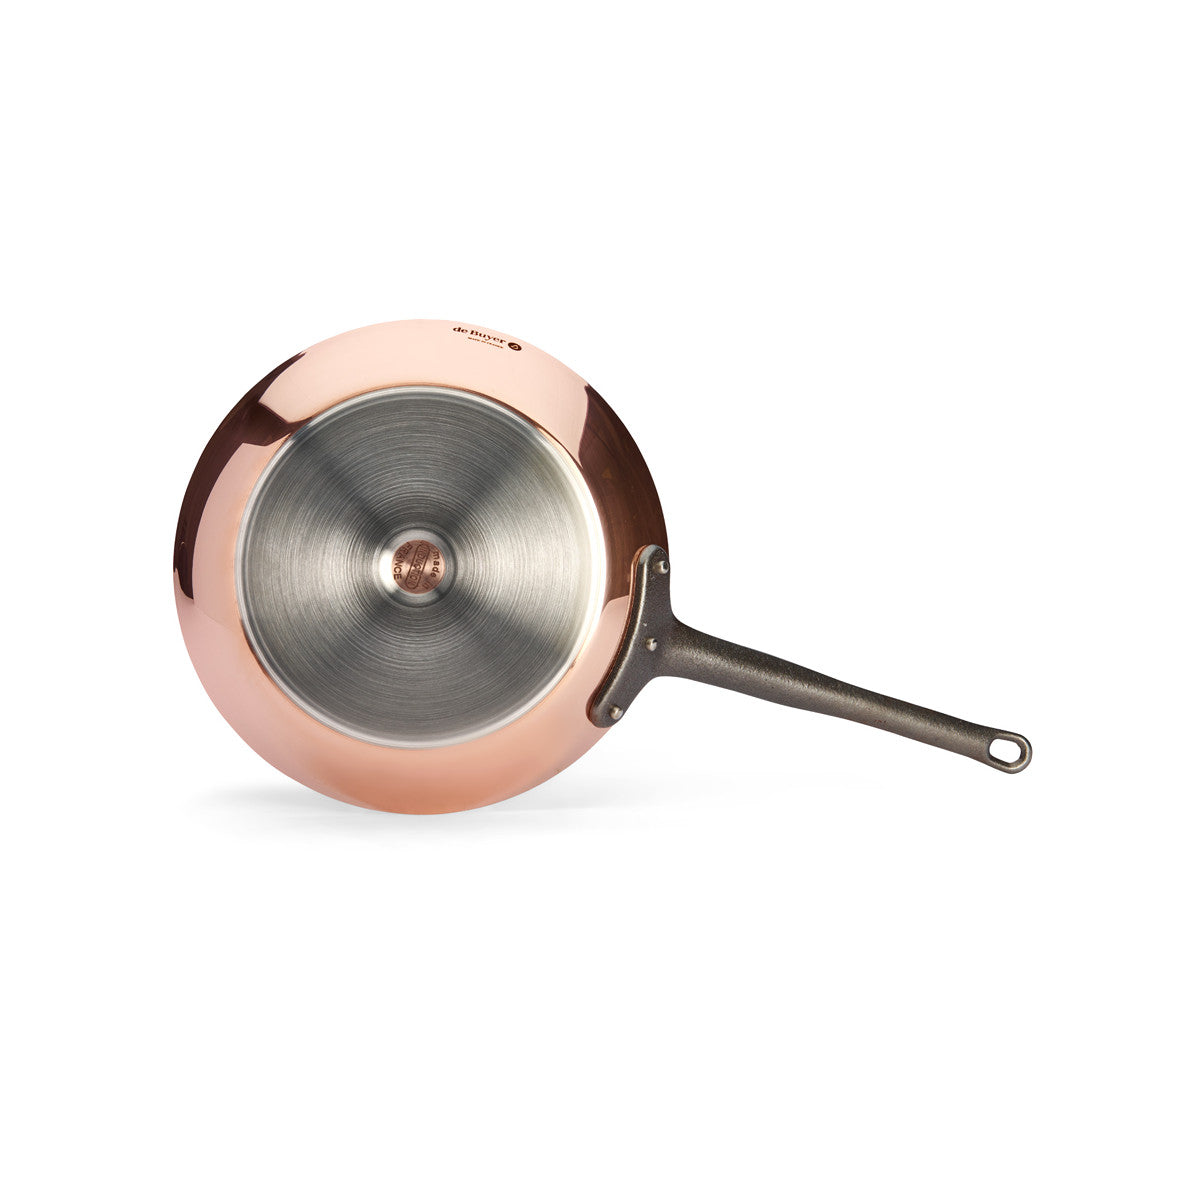 De Buyer Prima Matera Tradition copper frying pan for induction